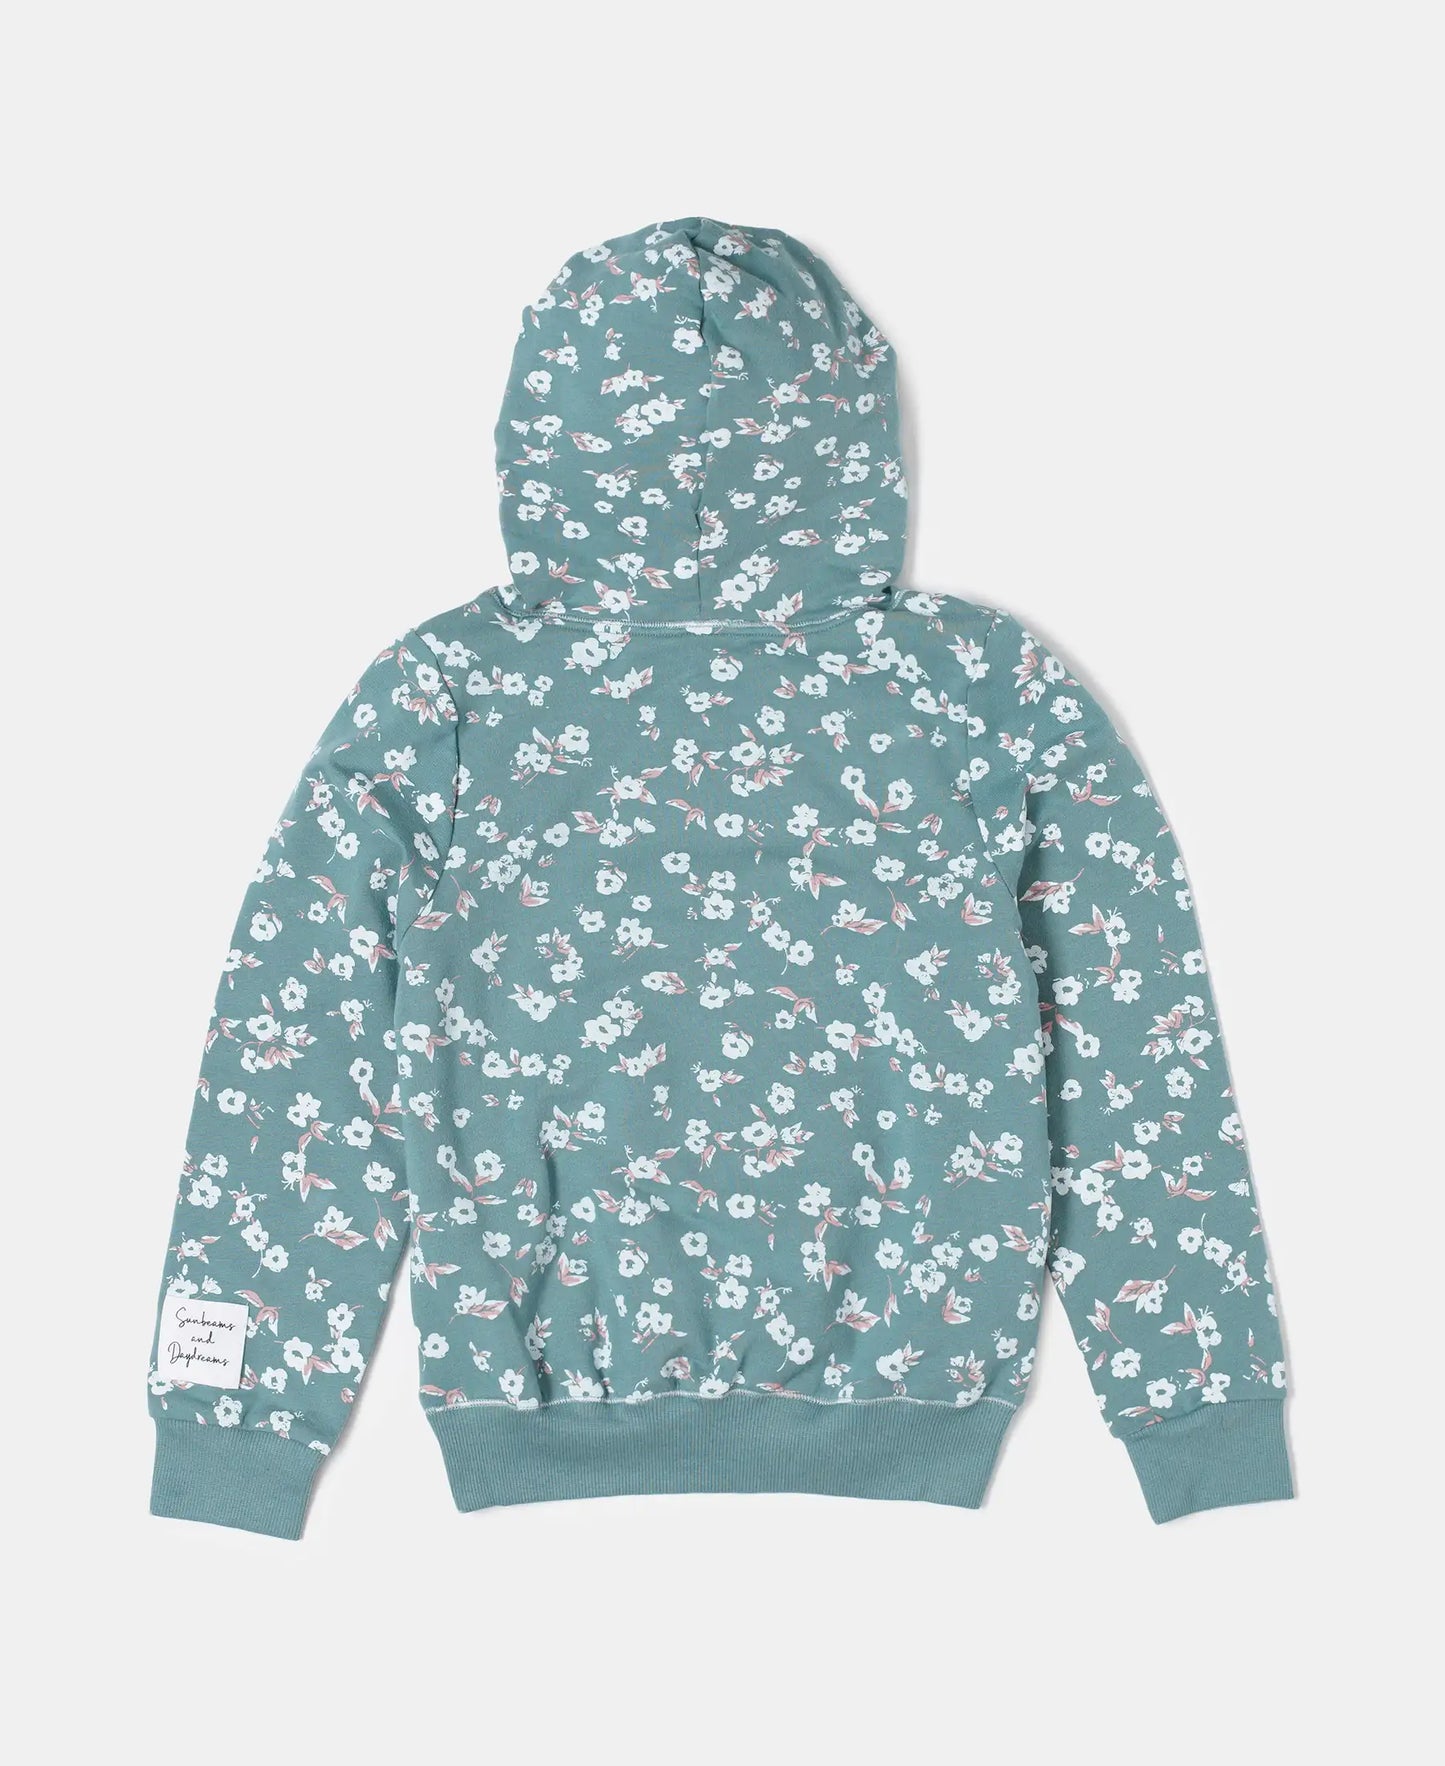 Super Combed Cotton Elastane French Terry Printed Hoodie Sweatshirt - Mineral Blue Printed-2